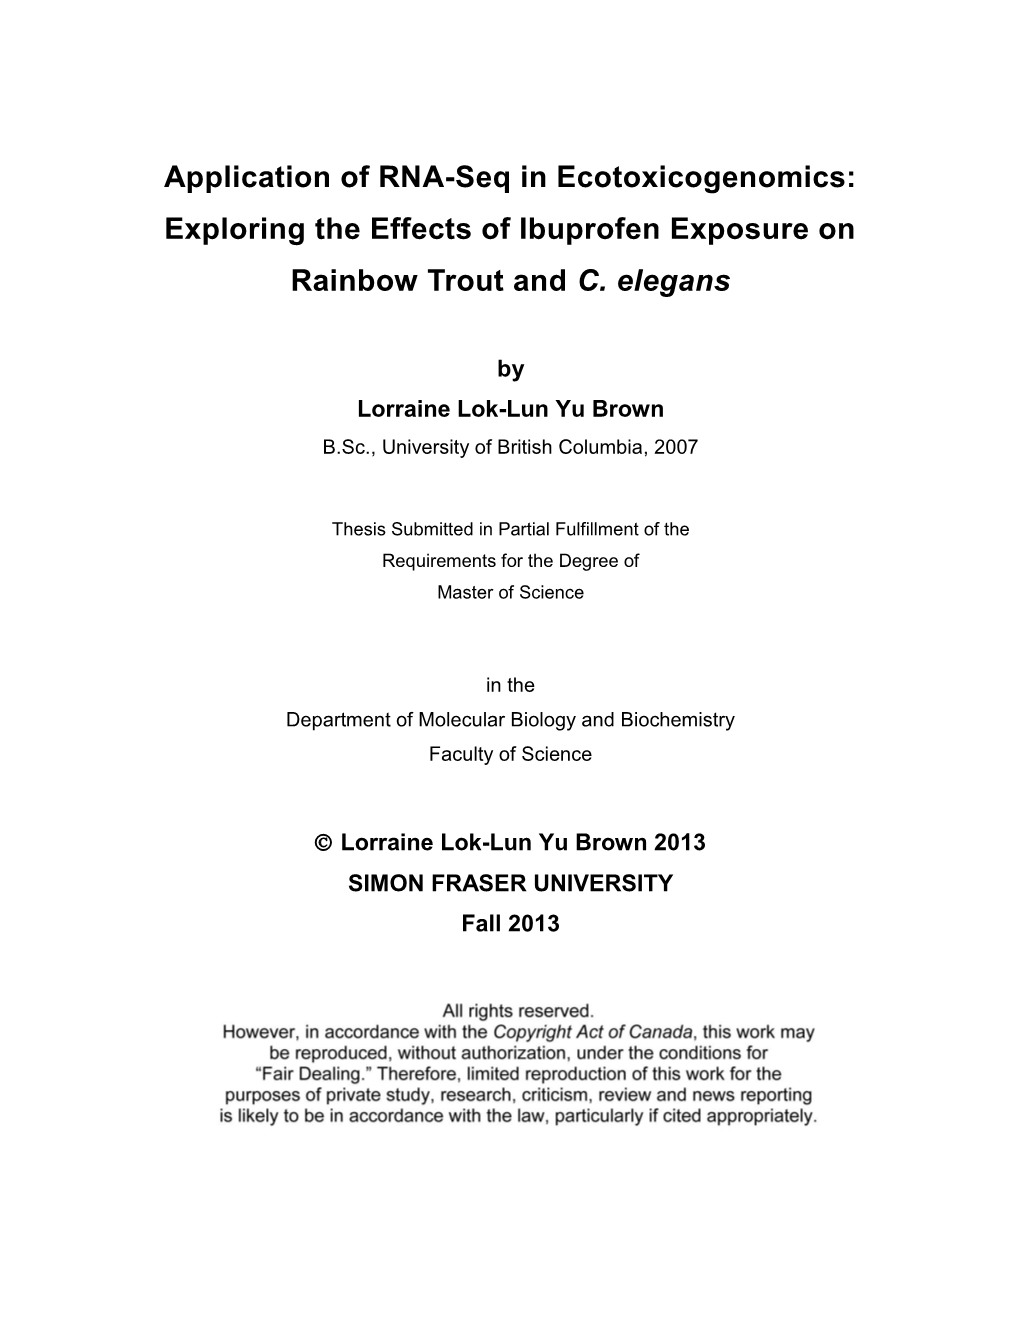 Application of RNA-Seq in Ecotoxicogenomics: Exploring the Effects of Ibuprofen Exposure on Rainbow Trout and C